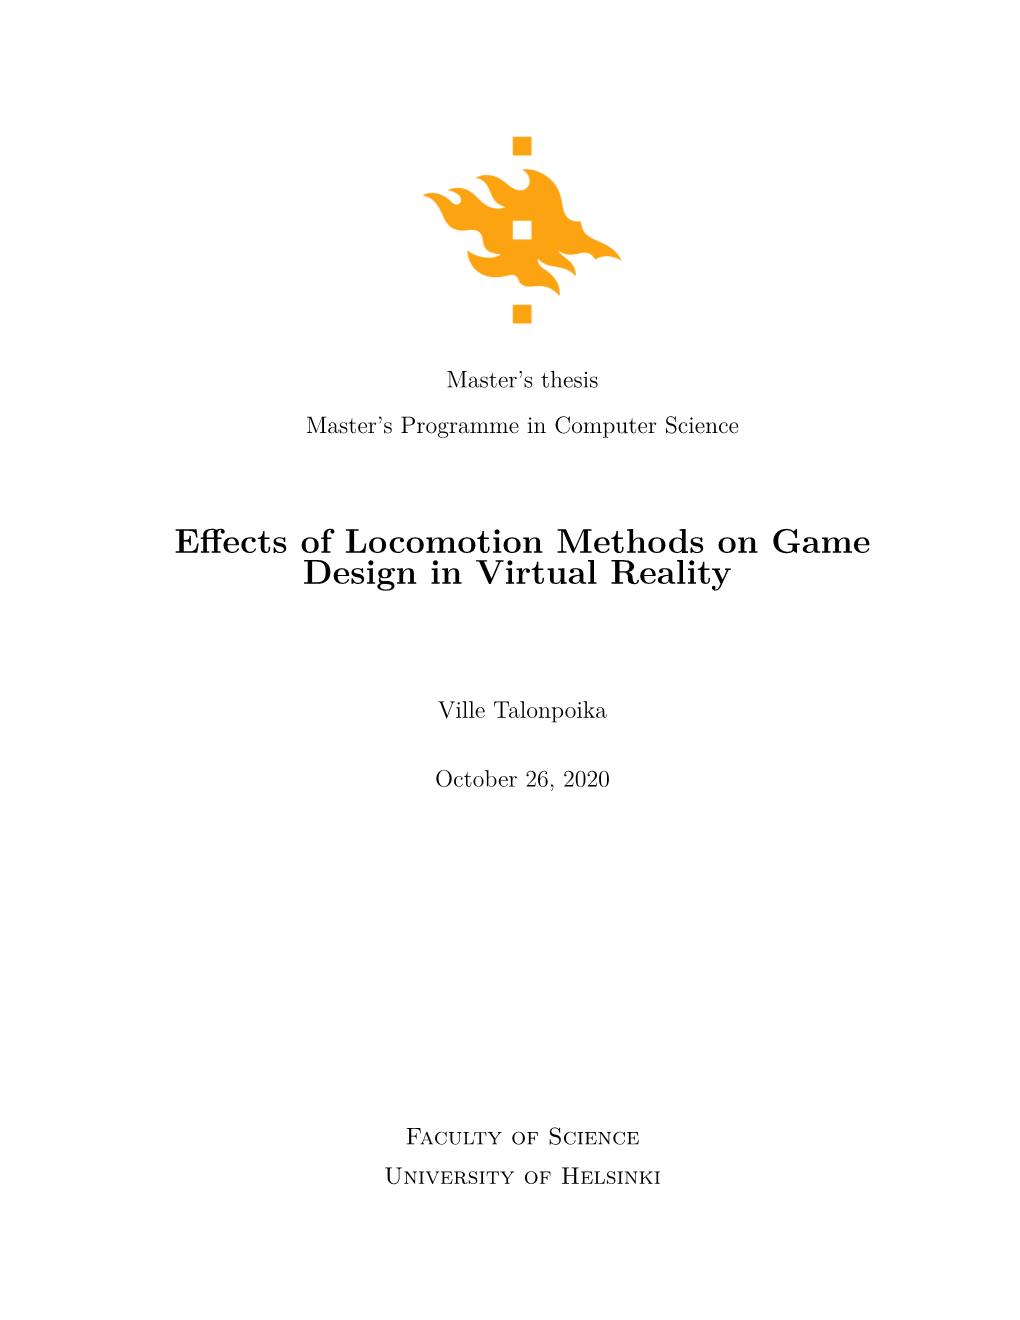 Effects of Locomotion Methods on Game Design in Virtual Reality